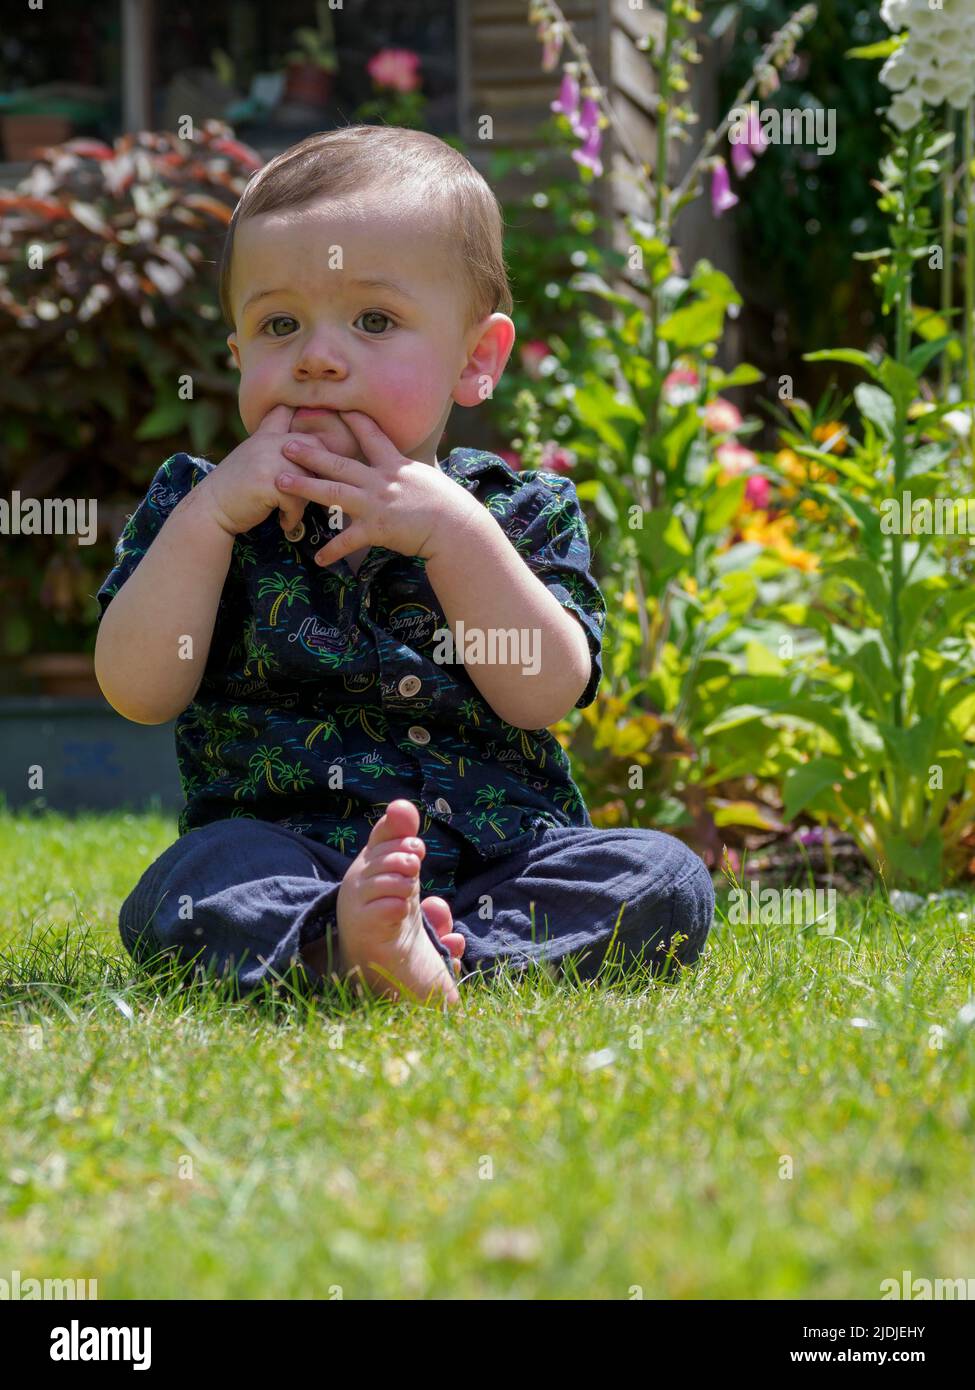 Teething toddler sat on grass with fingers in his mouth, Devon, UK Stock Photo